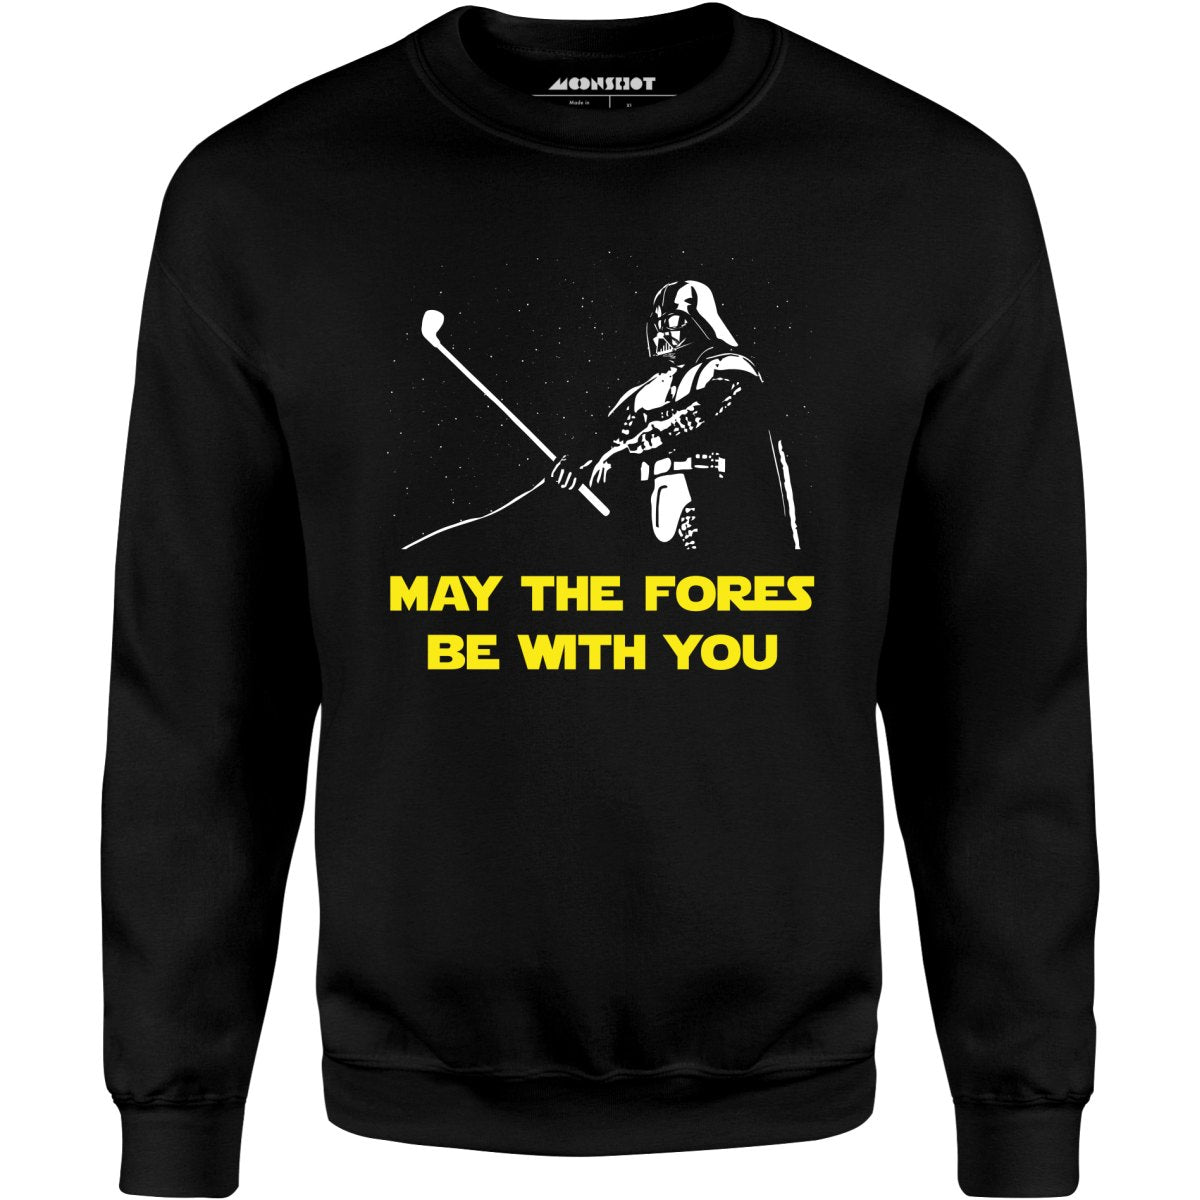 May The Fores Be With You - Unisex Sweatshirt